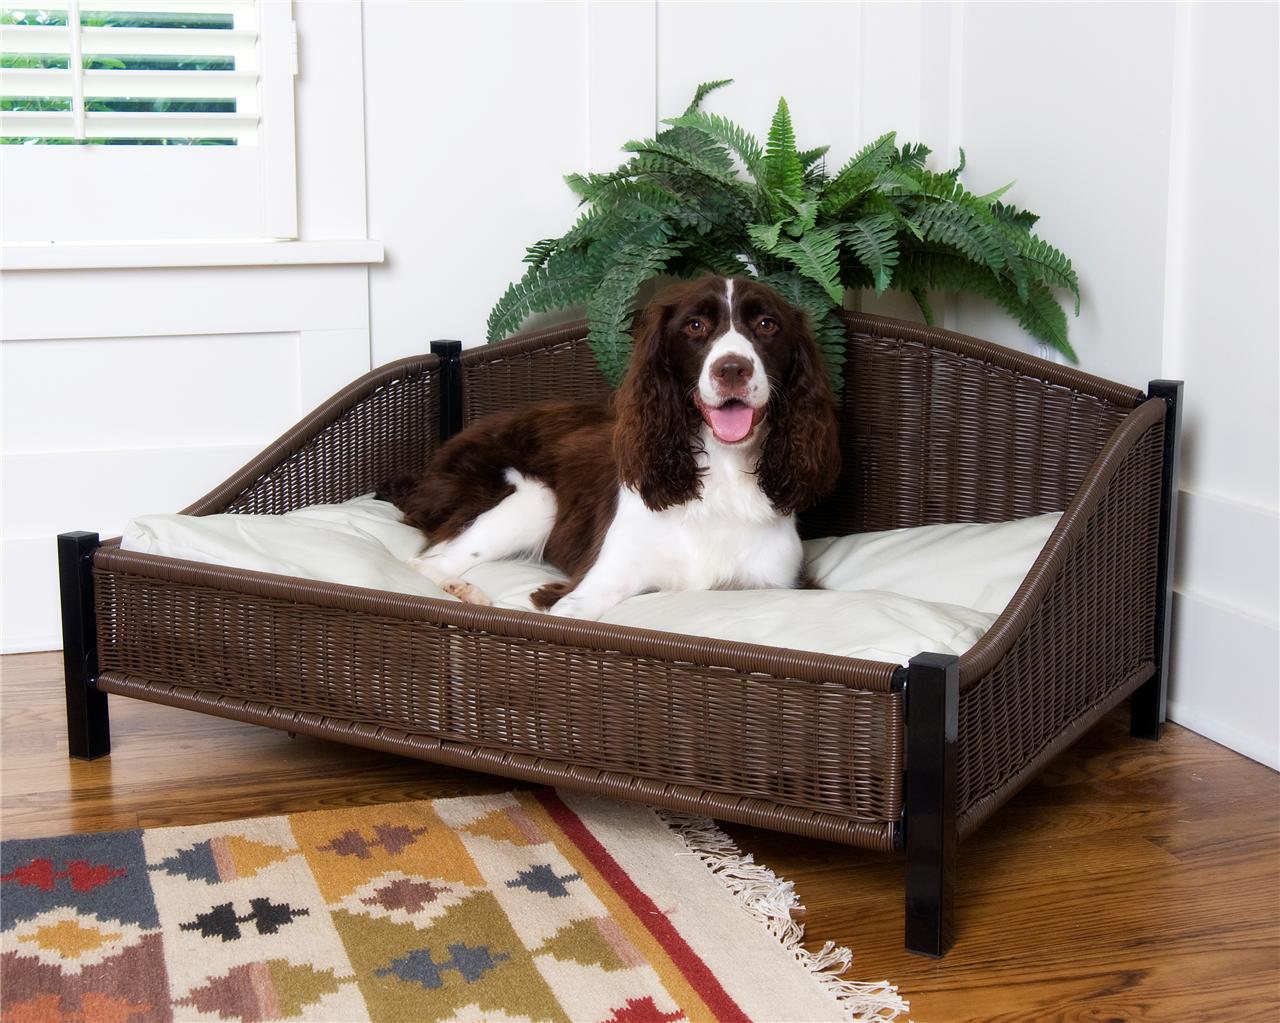 Wicker Dog Bed with Easy Clean Pet Cushion Soft Pillow | eBay